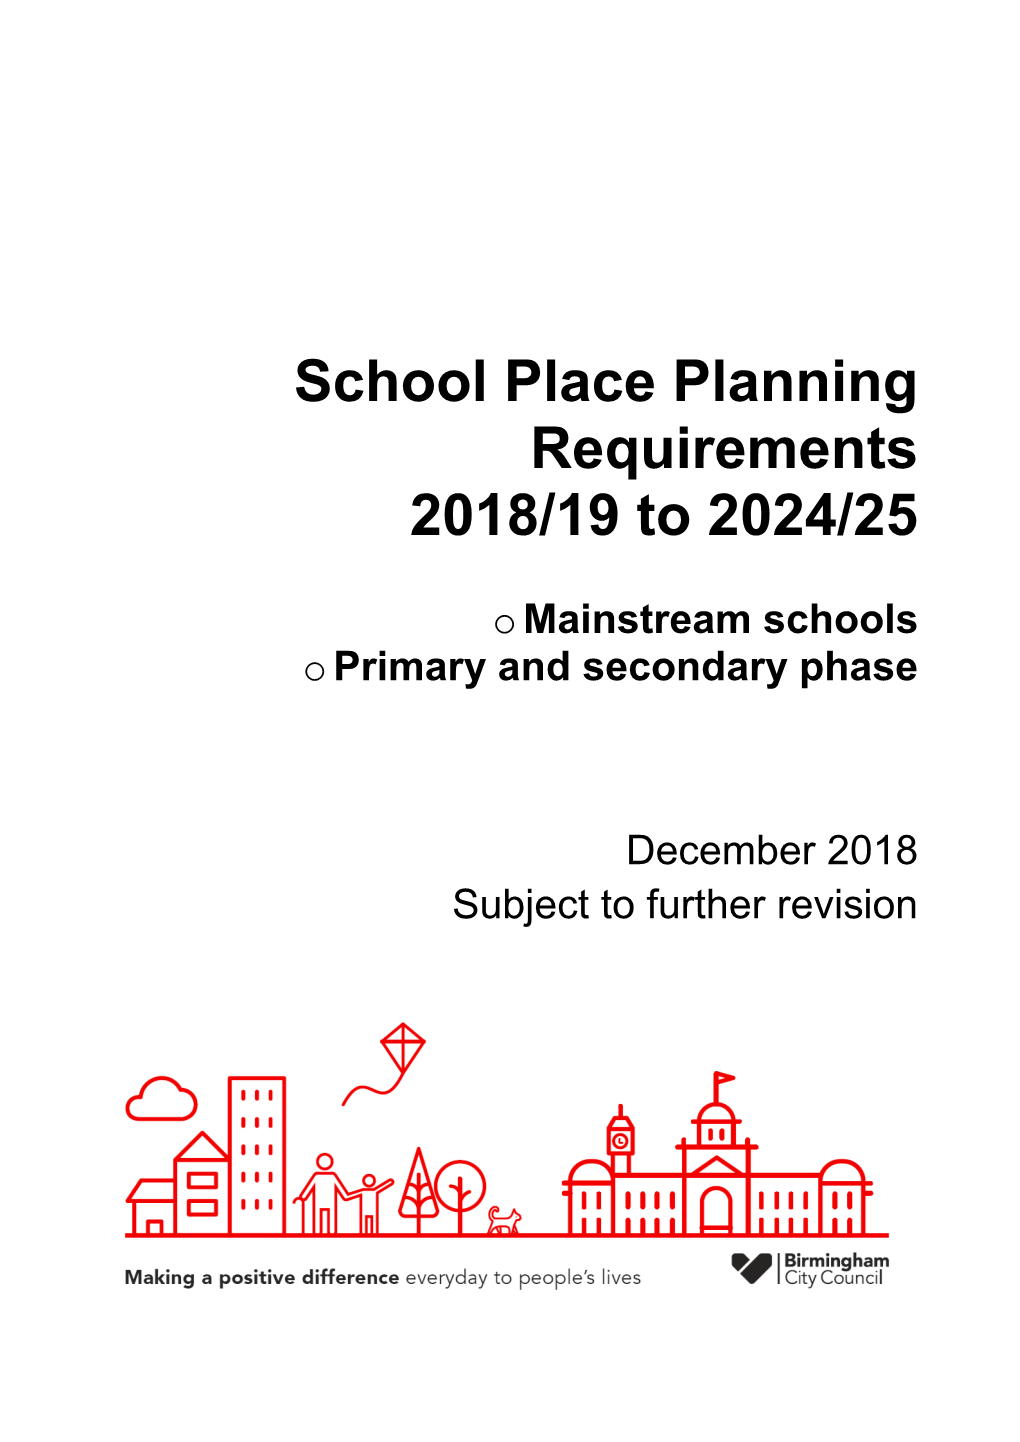 School Place Planning Requirements 2018/19 to 2024/25